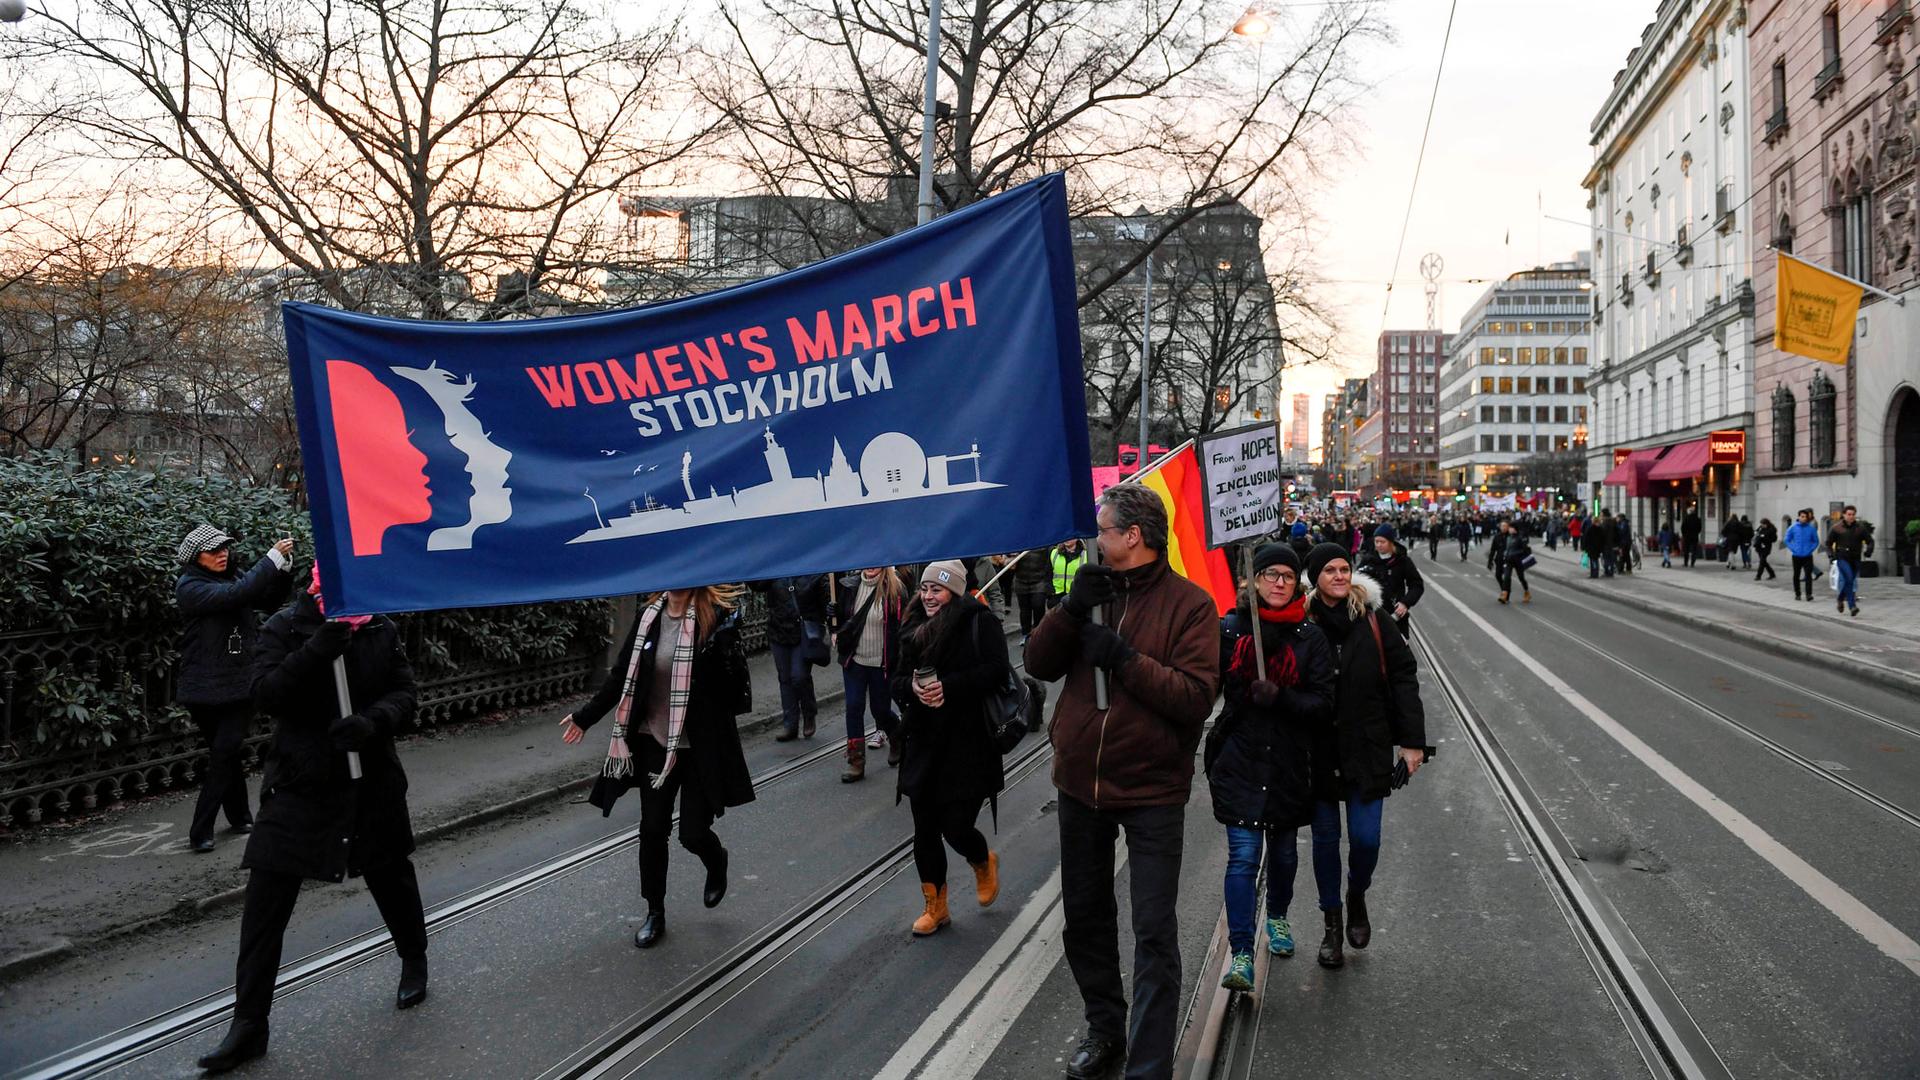 People carry a large banner that says "Women's March Stockholm" down a wide city street.